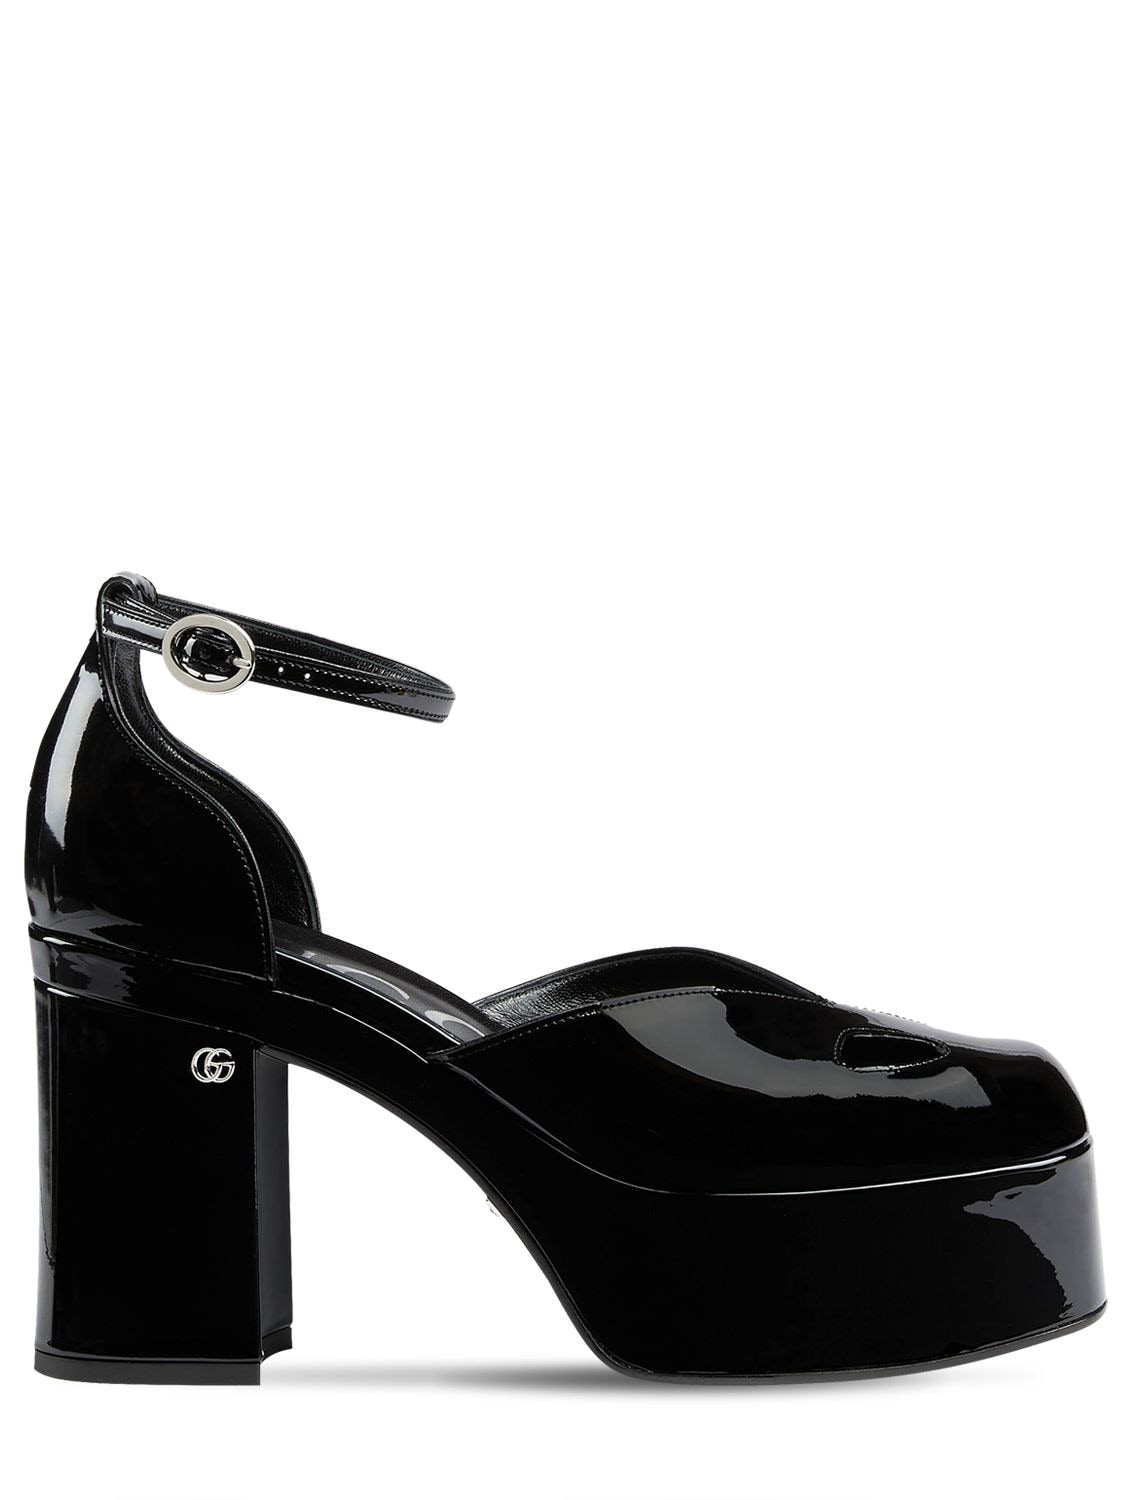 gucci patent leather heels